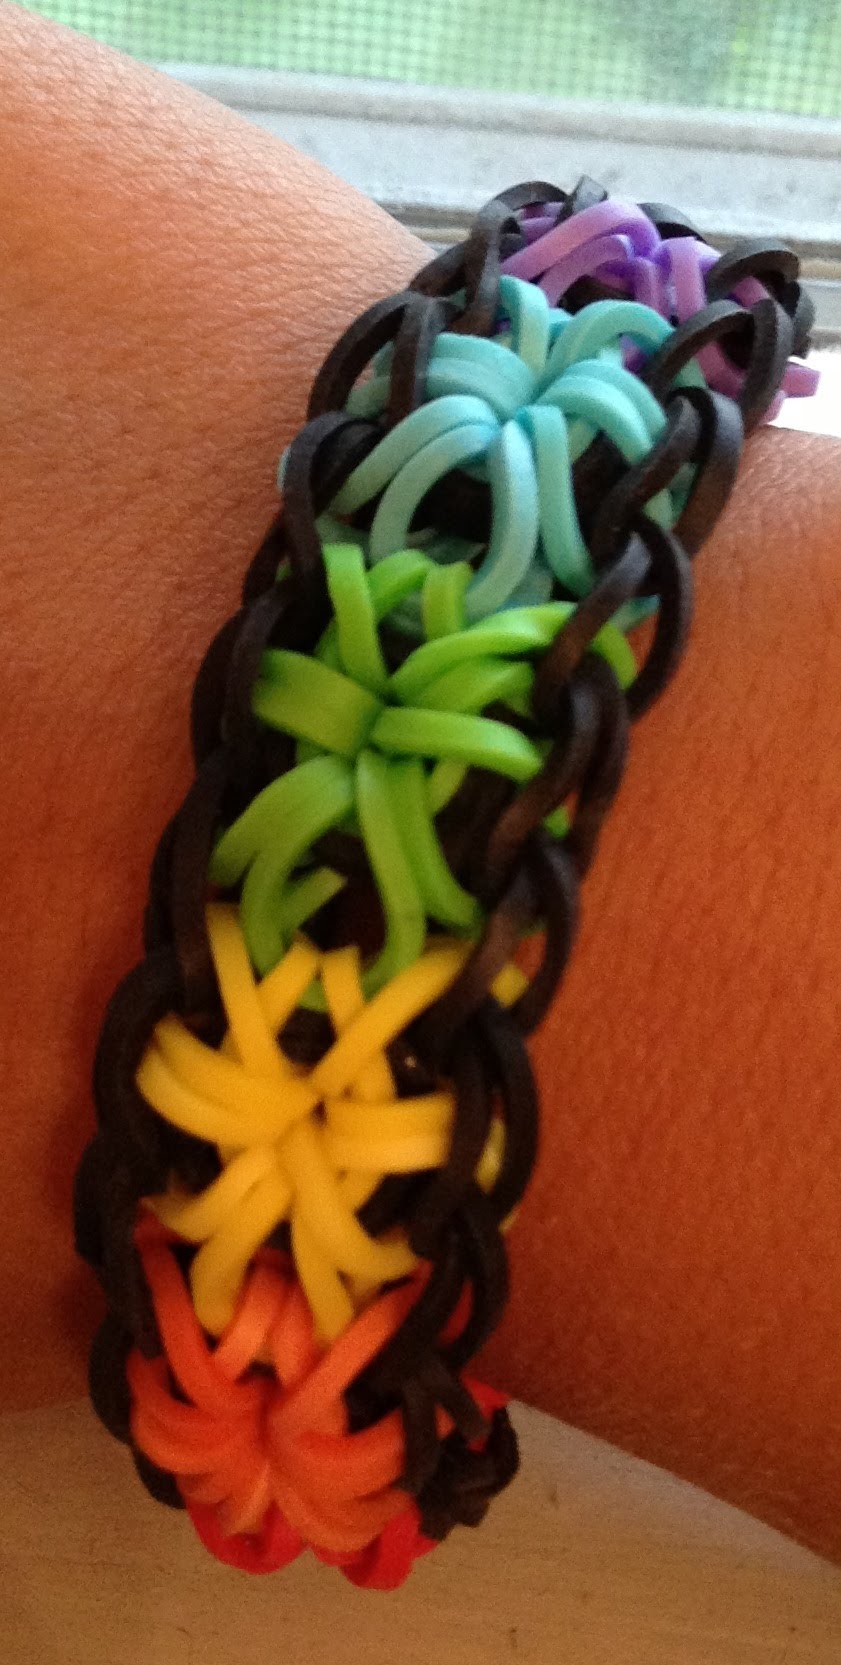 How to make loom bands with your fingers: 10 tutorials